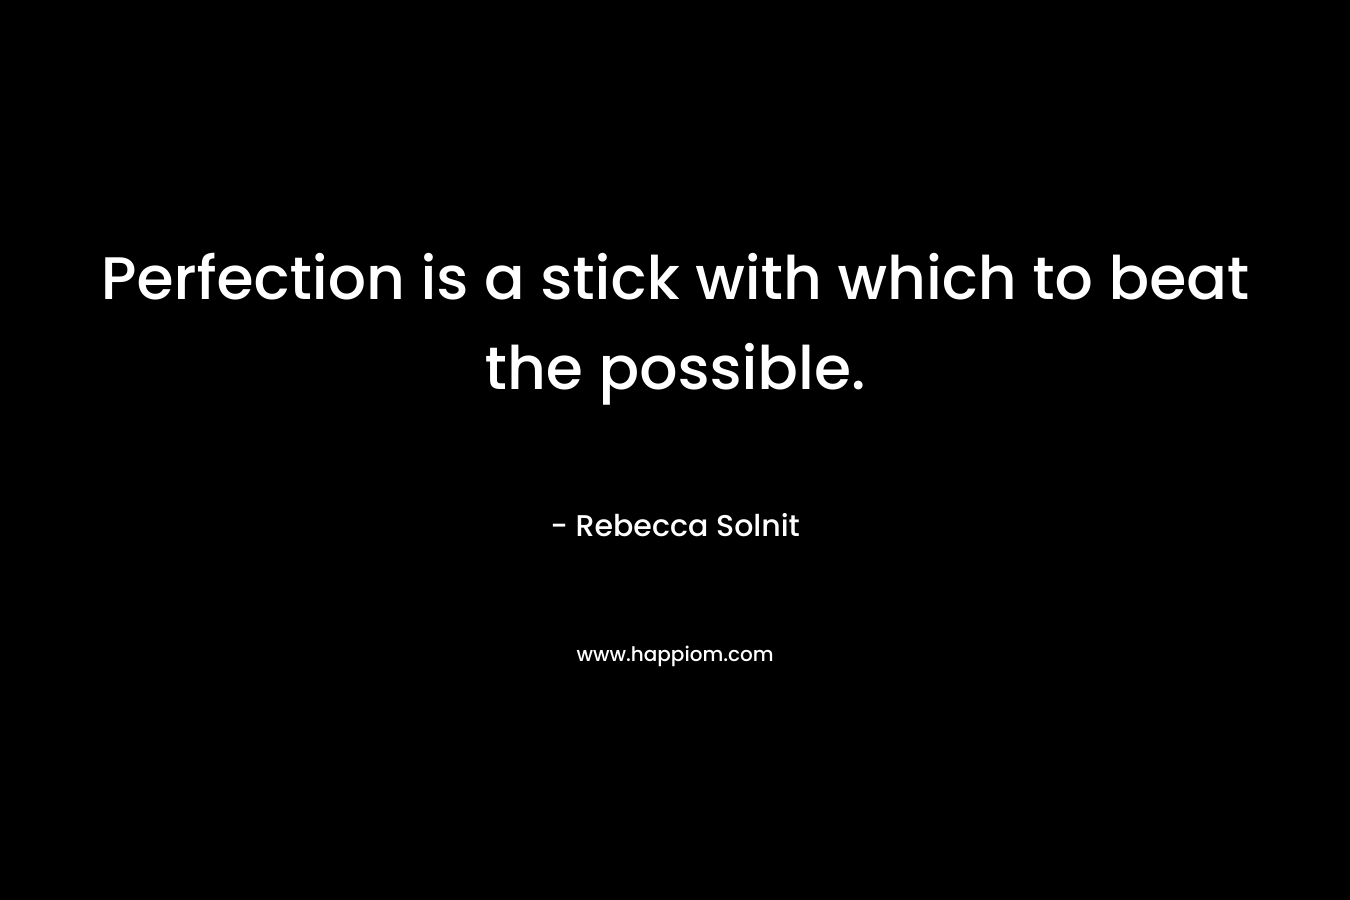 Perfection is a stick with which to beat the possible.